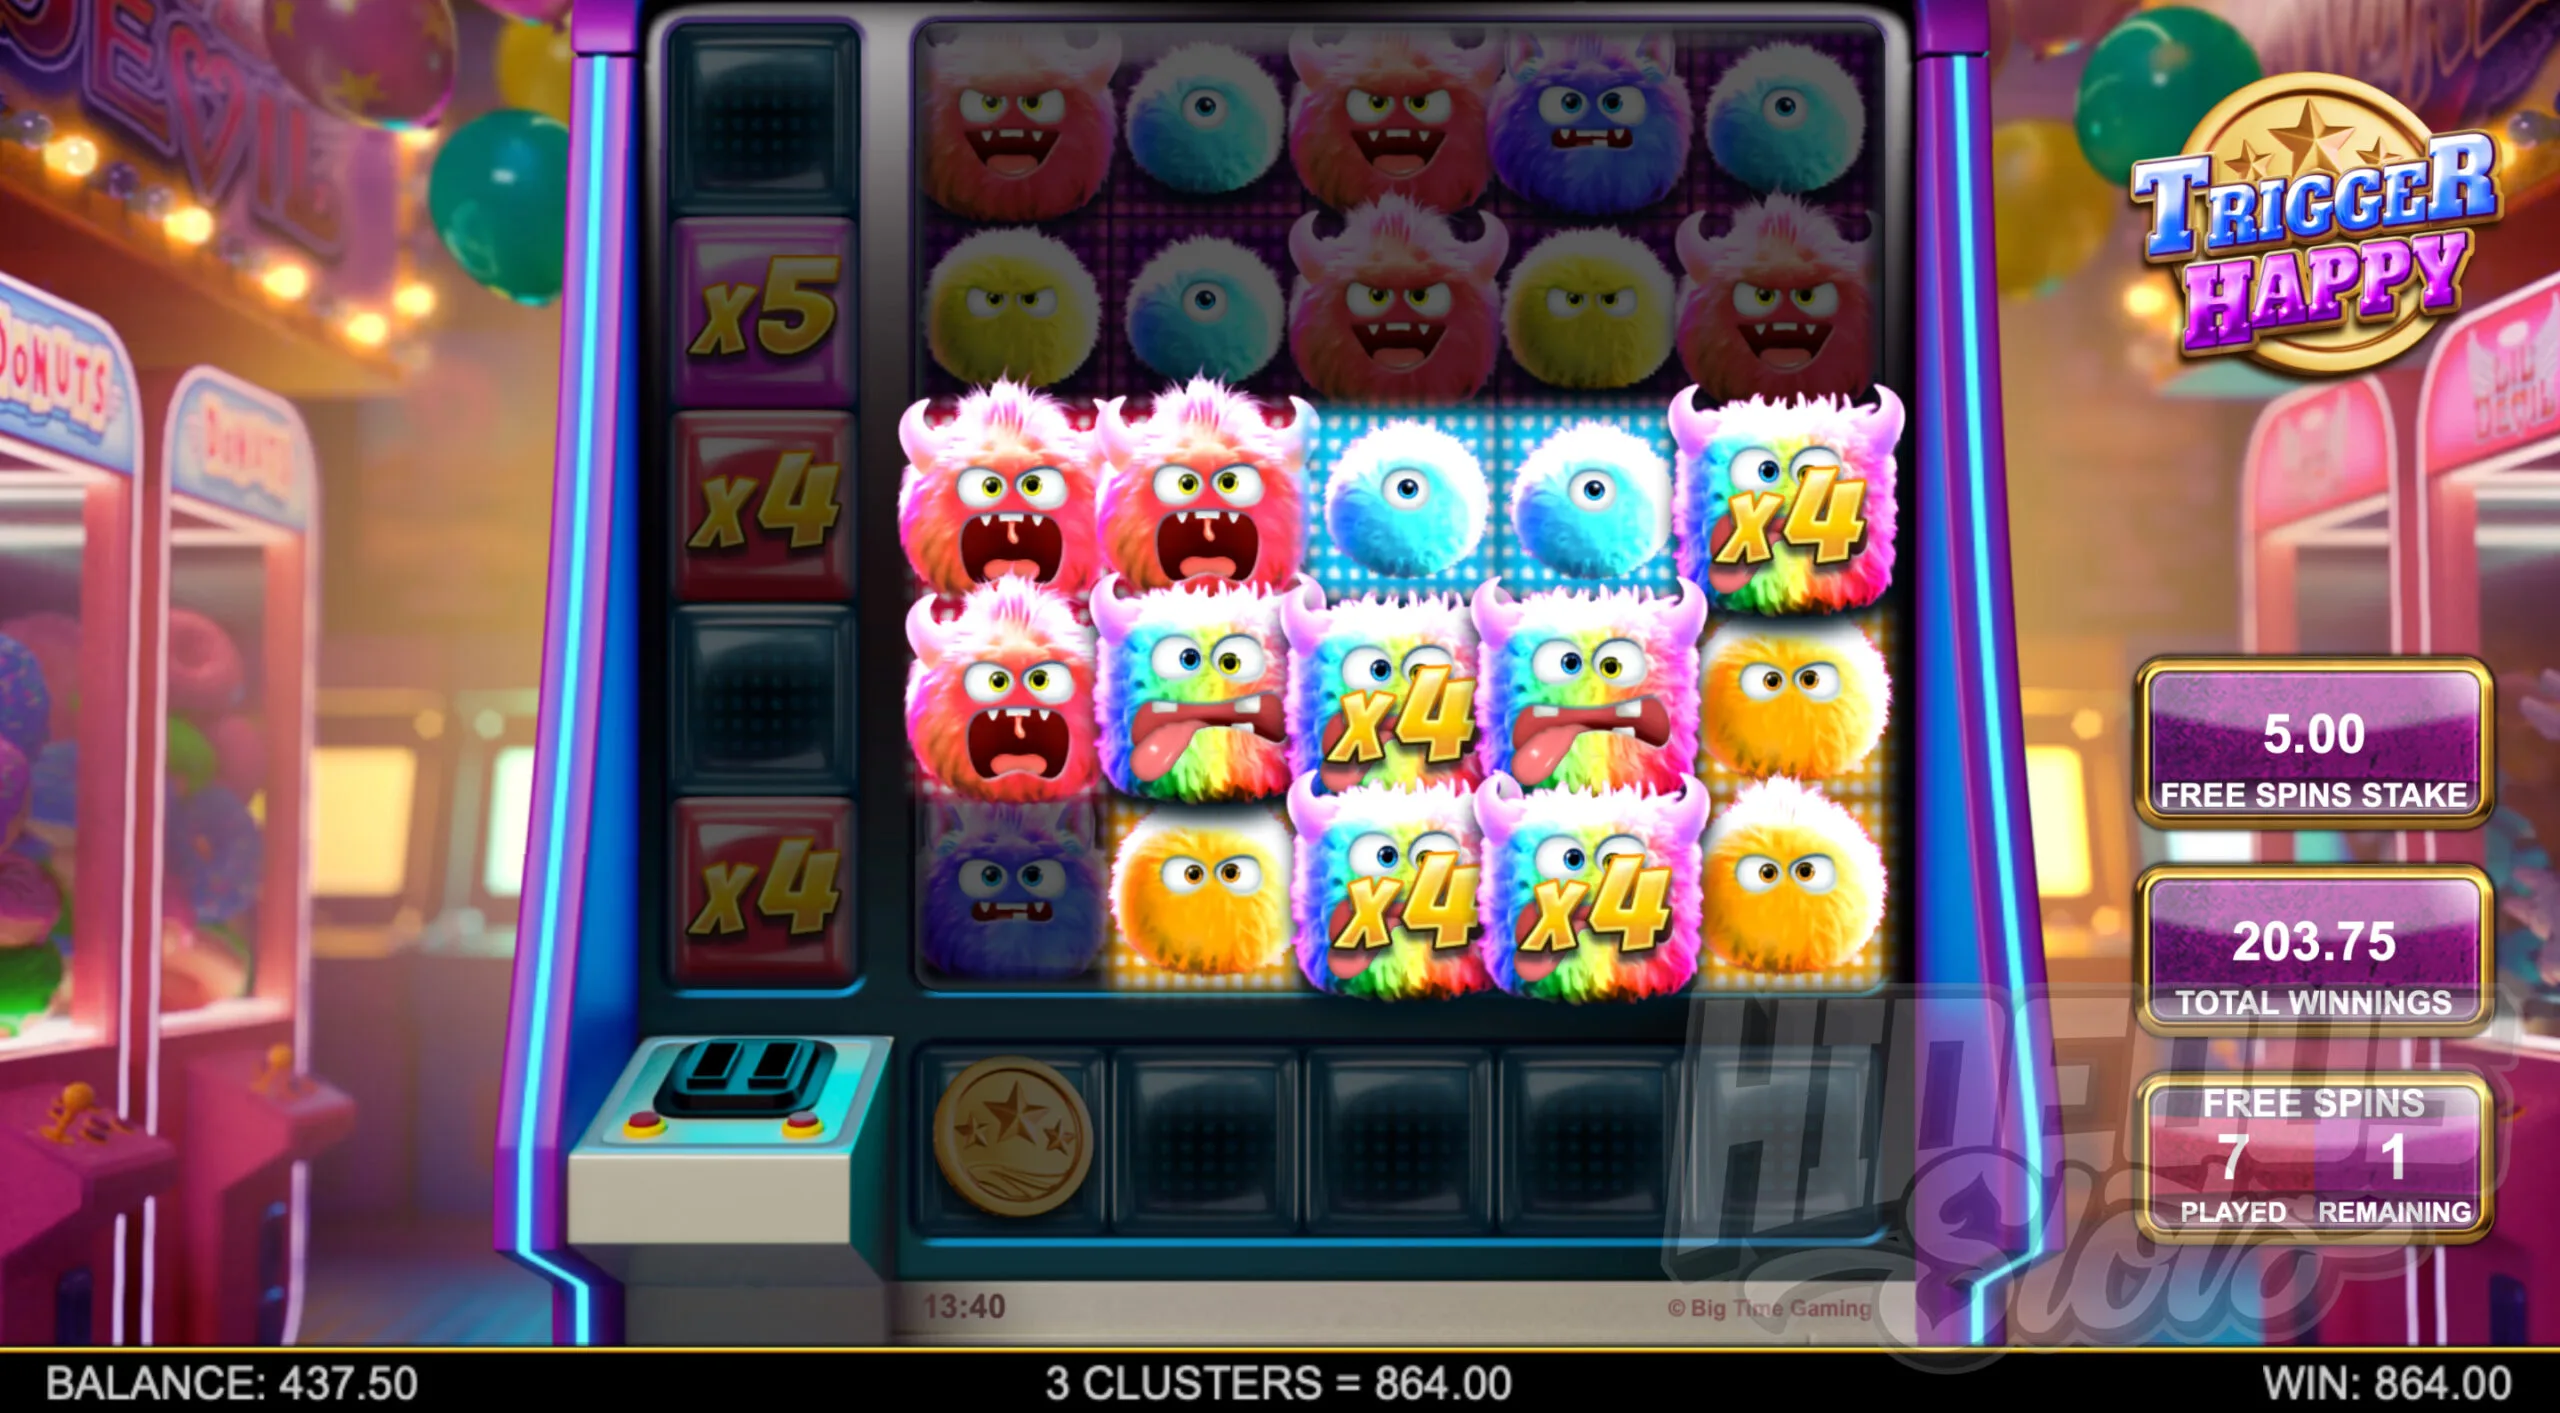 During Free Spins There are 2 Targets That Place Wild Symbols on the Grid